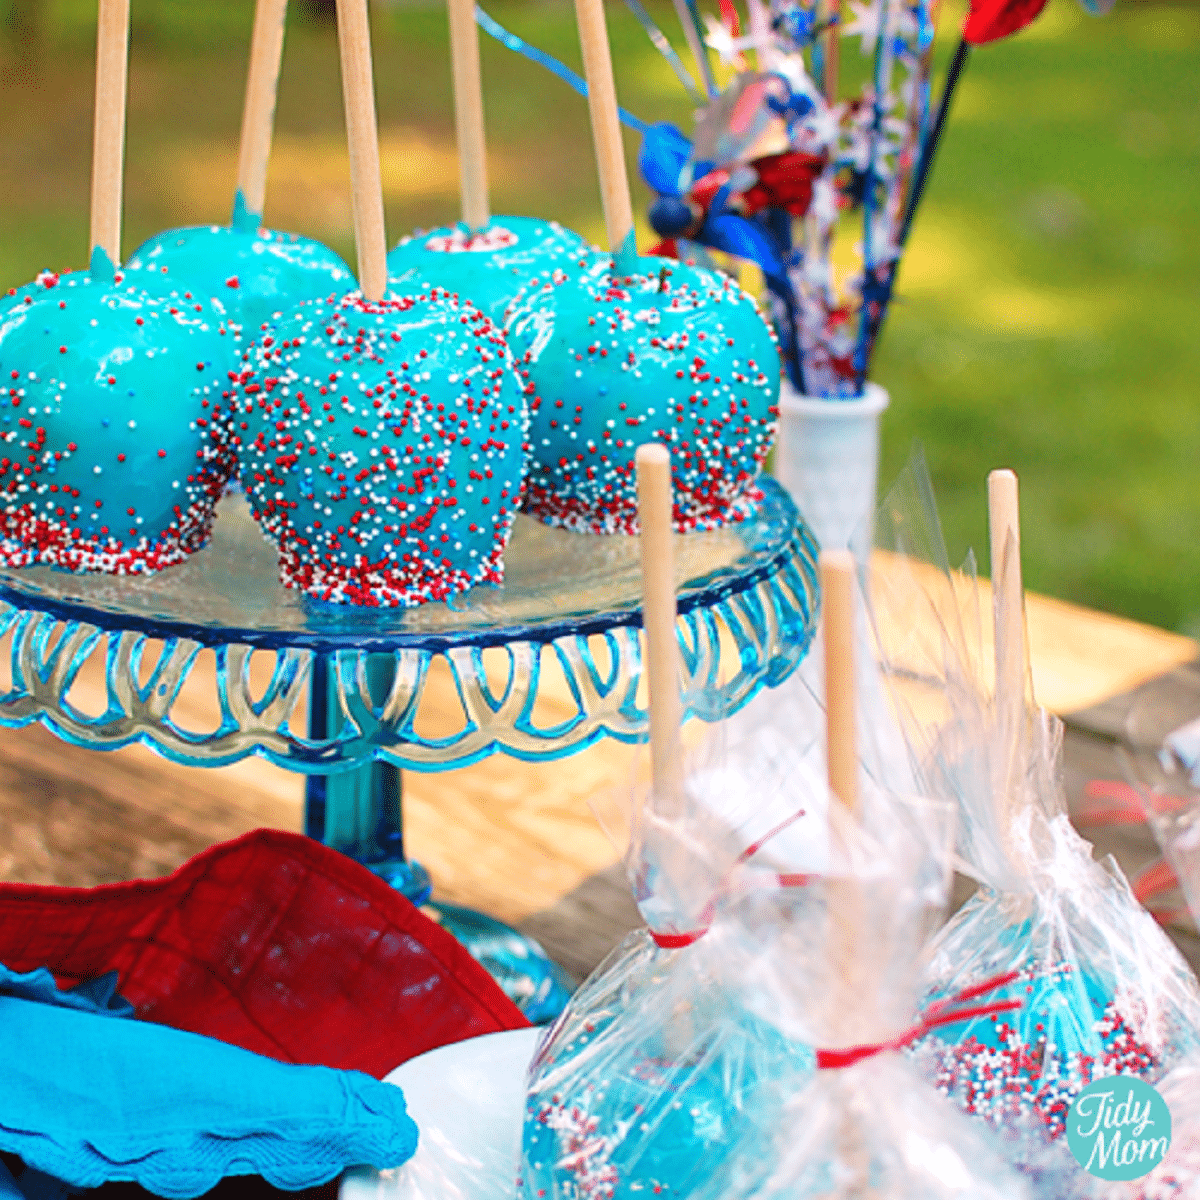 Apples dipped in blue coating with red white and blue sprinkles on tall blue cake stand